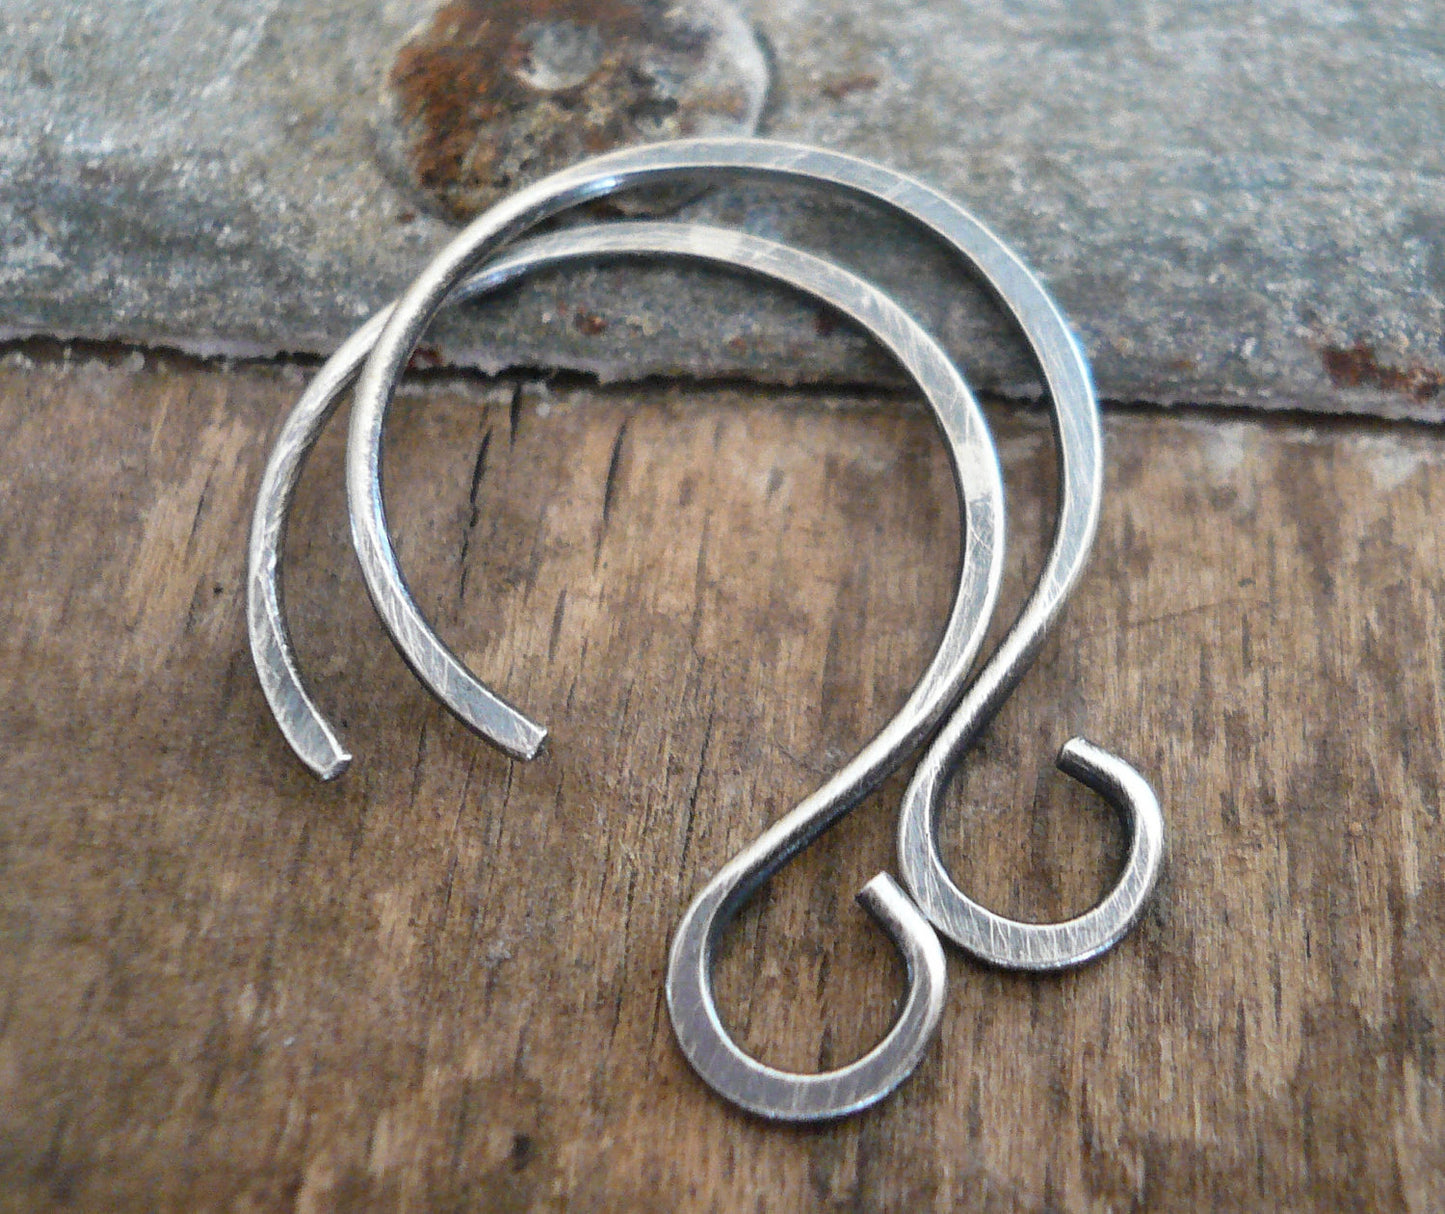 8 Pair Variety Pack Sterling Silver Earwires - Handmade. Handforged. Oxidized and polished